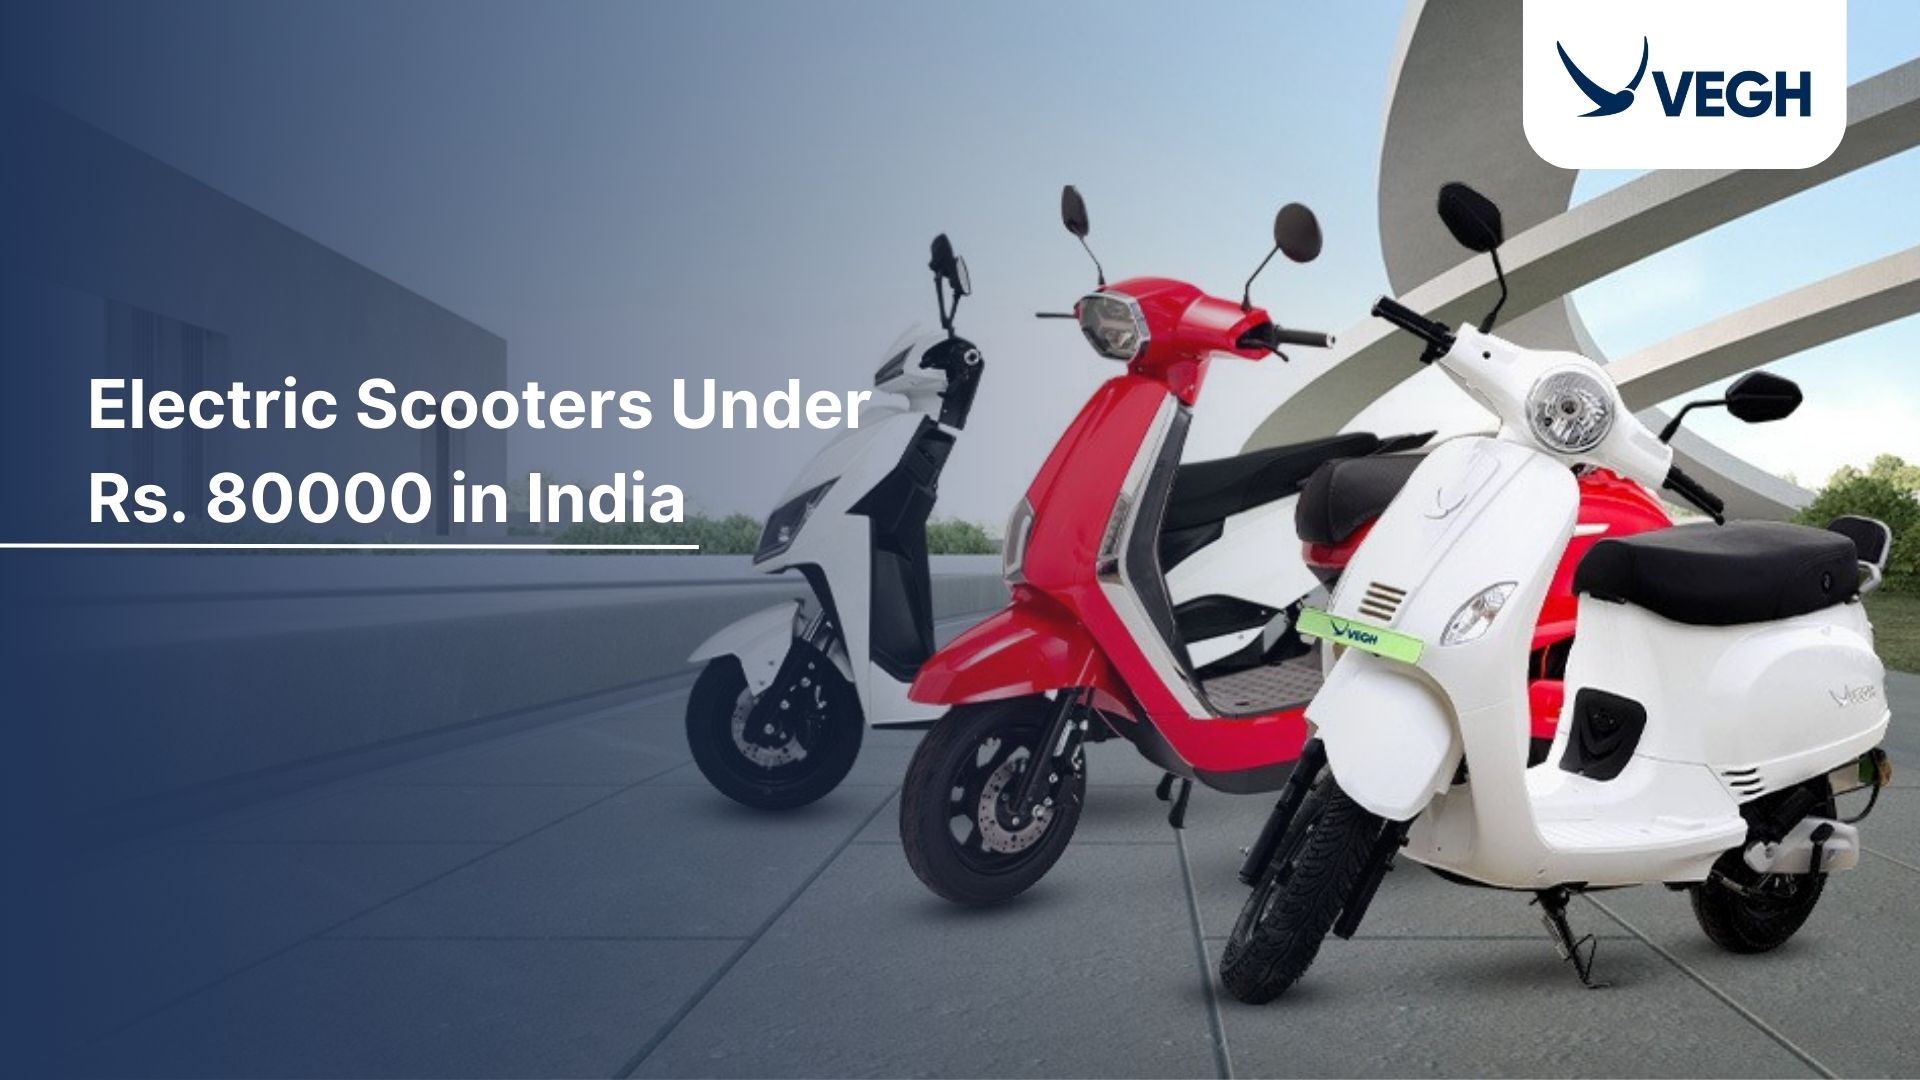 Electric Scooters Under Rs. 80000 in India